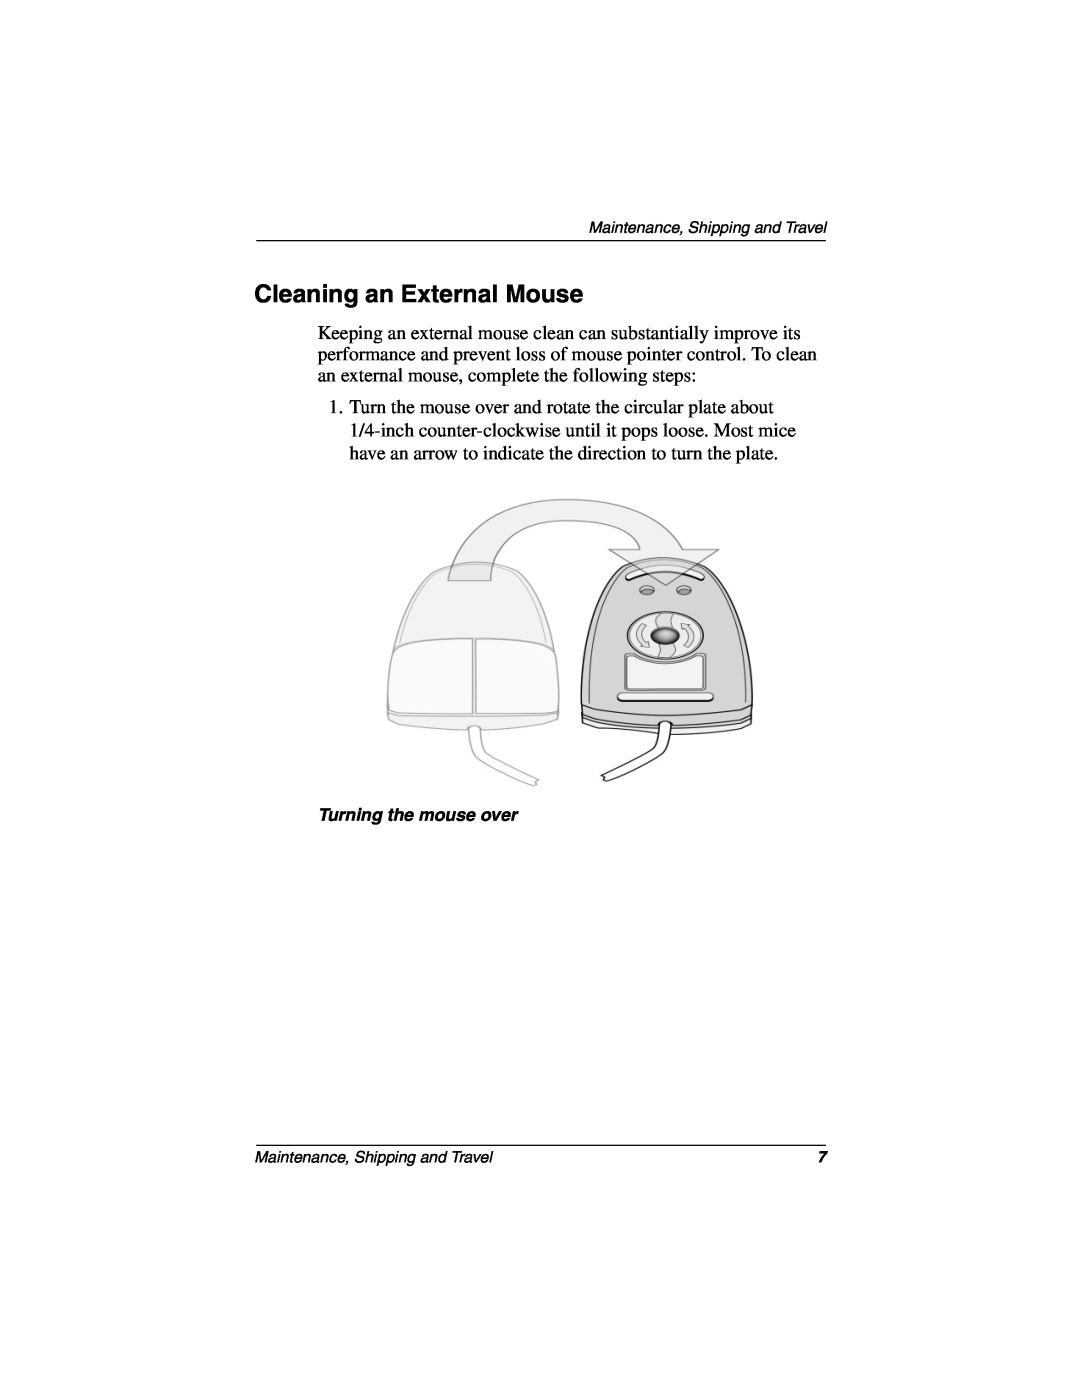 Compaq 267637-001 manual Cleaning an External Mouse, Turning the mouse over 